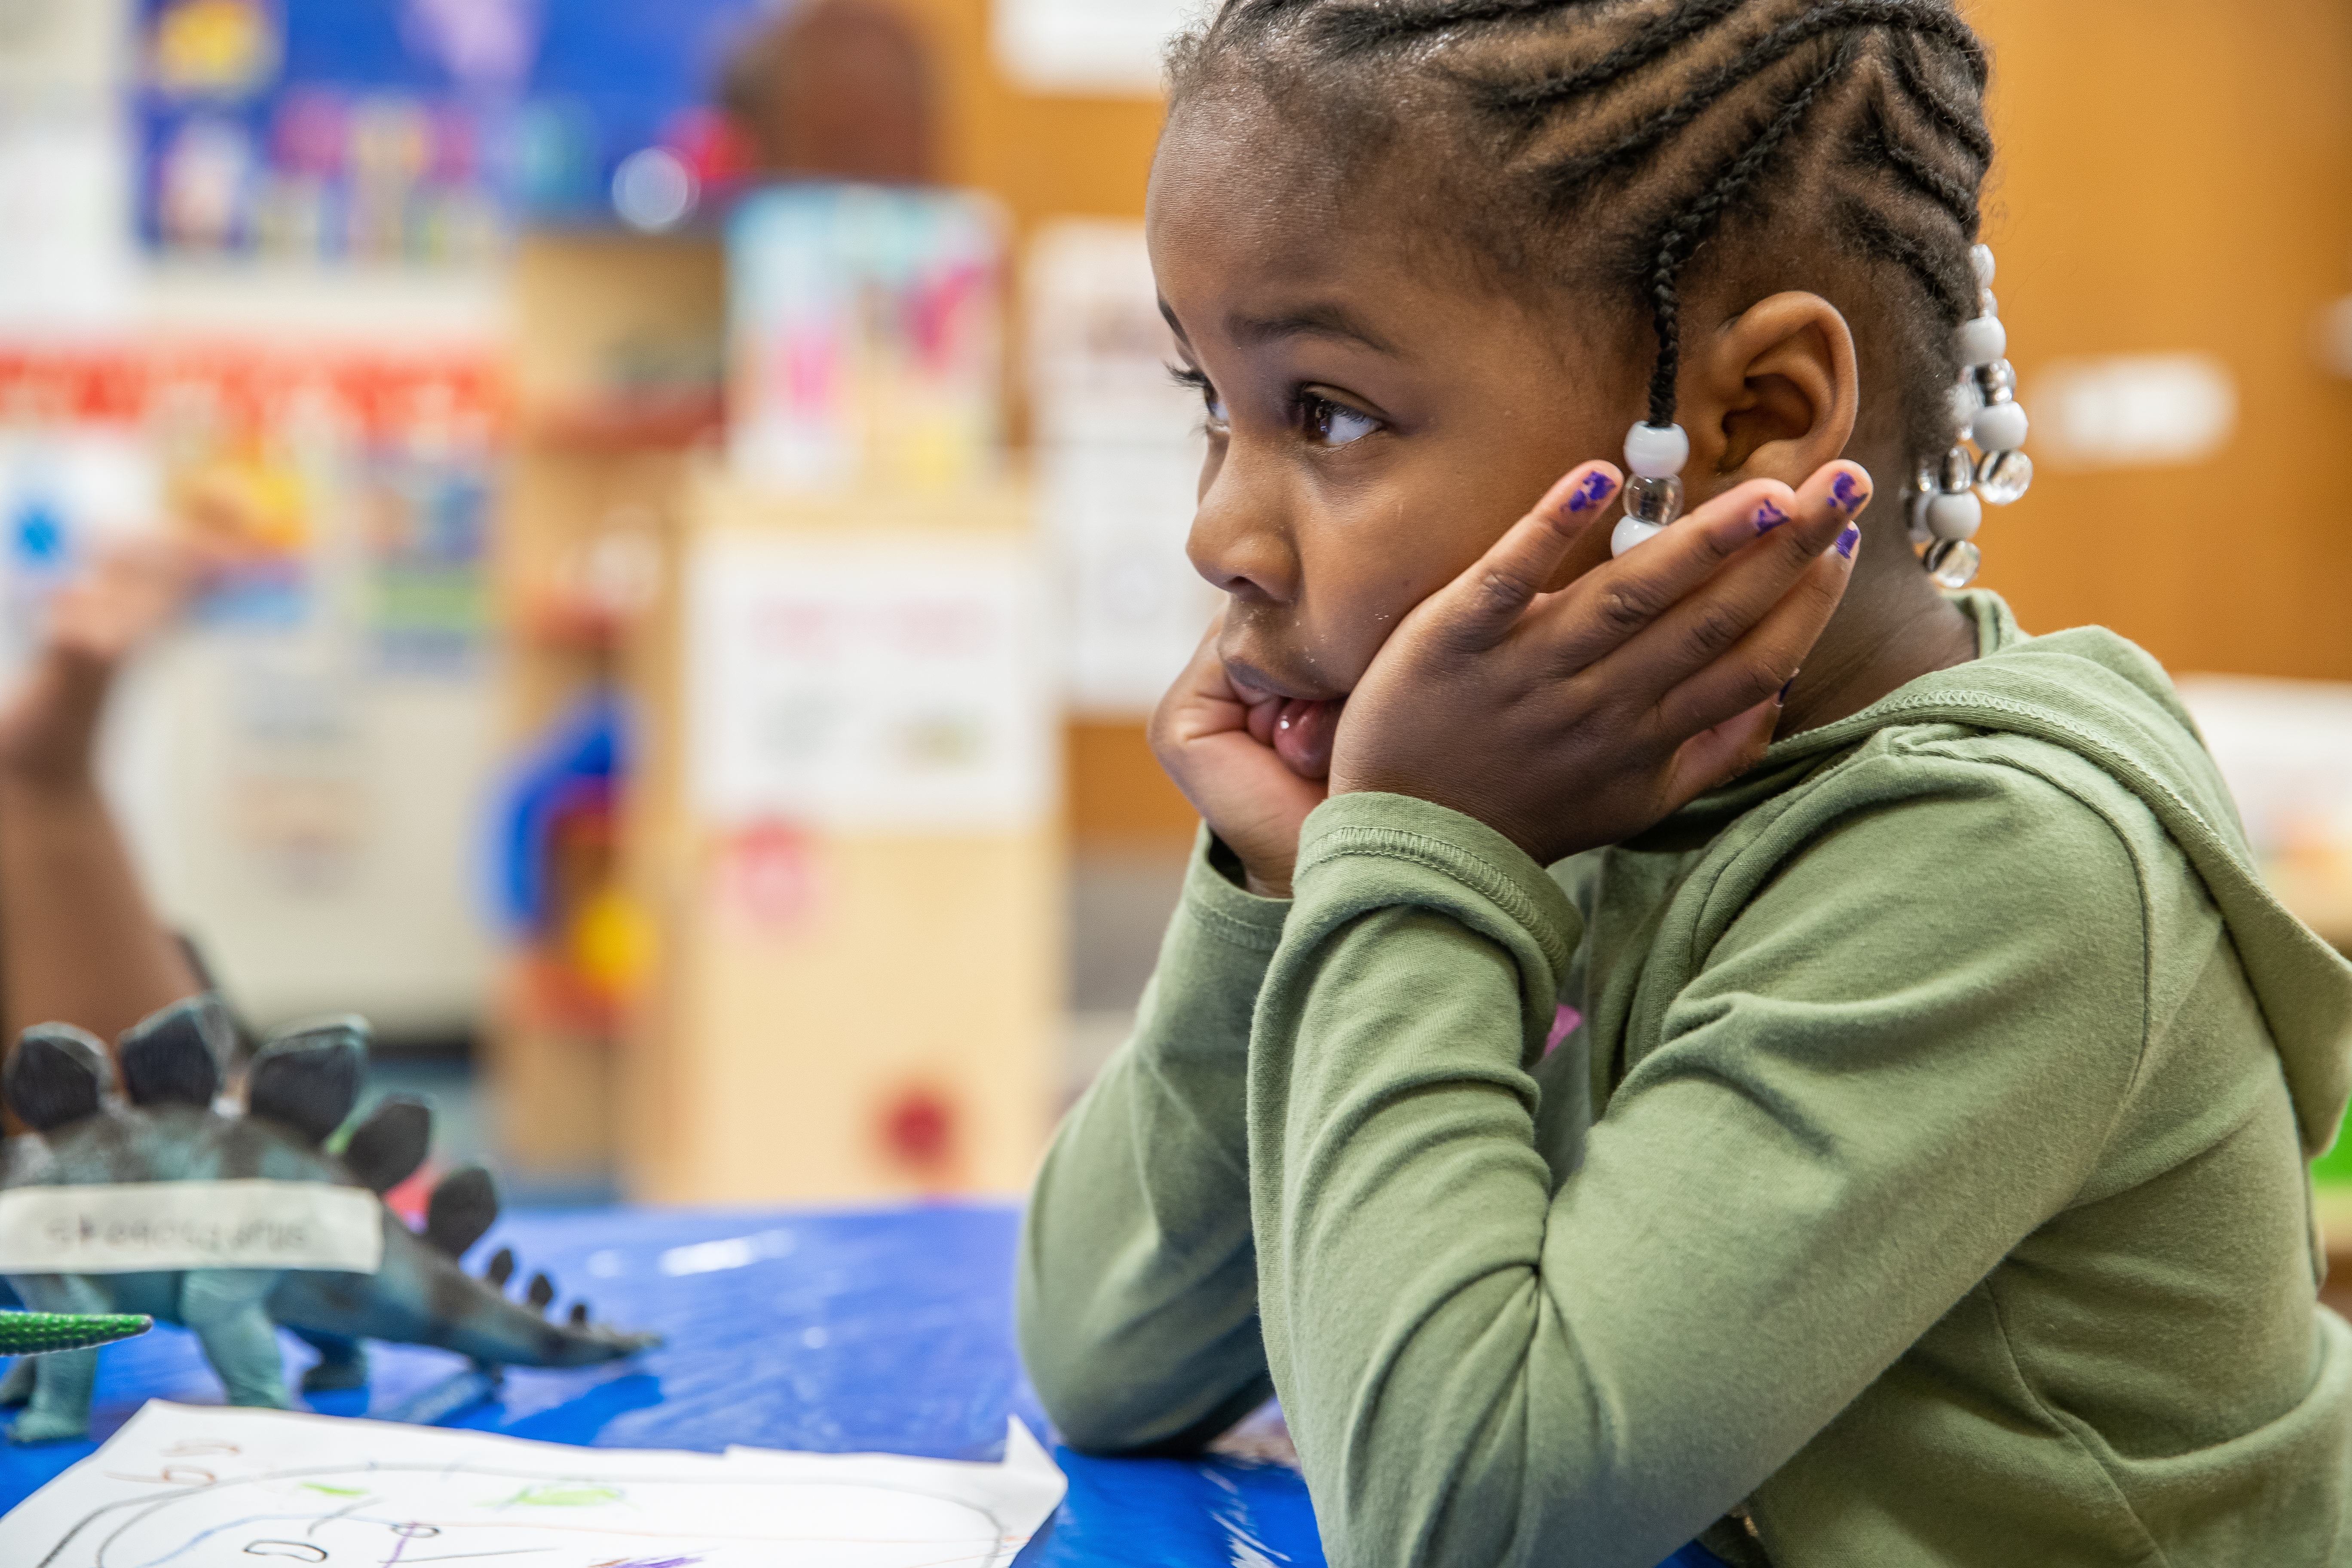 Prius Winters, 4, a pre-kindergarten student at Avondale Meadows YMCA Early Learning Center in Indianapolis, waits for teacher, Cecelia Washington, to label her drawing of her favorite dinosaur during a lesson on Tuesday, April 30, 2019.